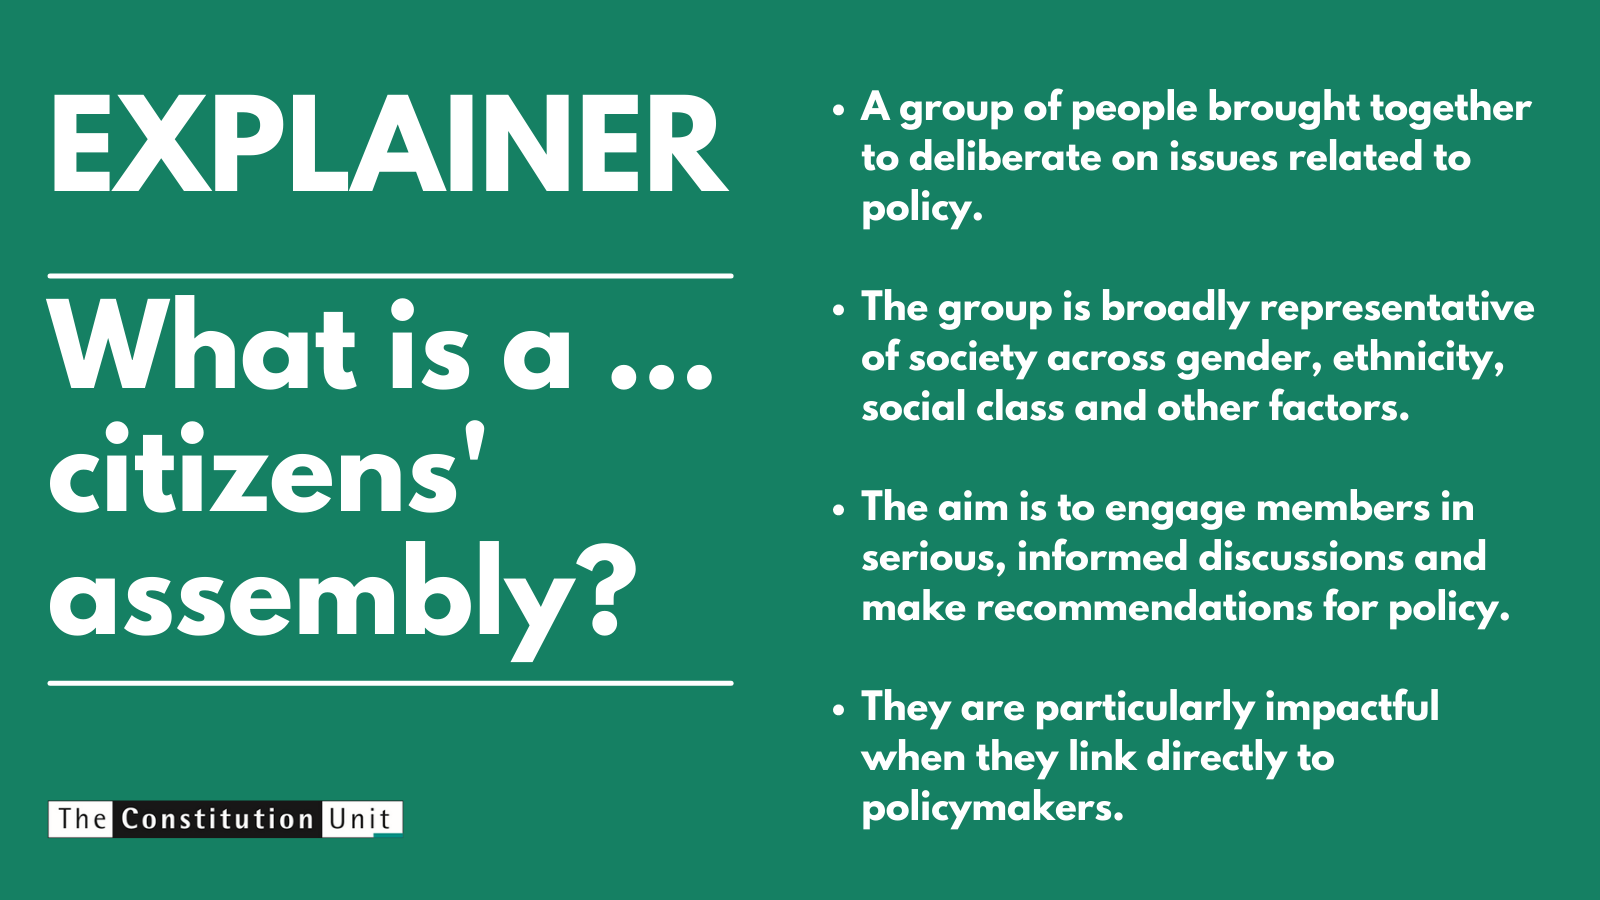 What is a citizens' assembly?